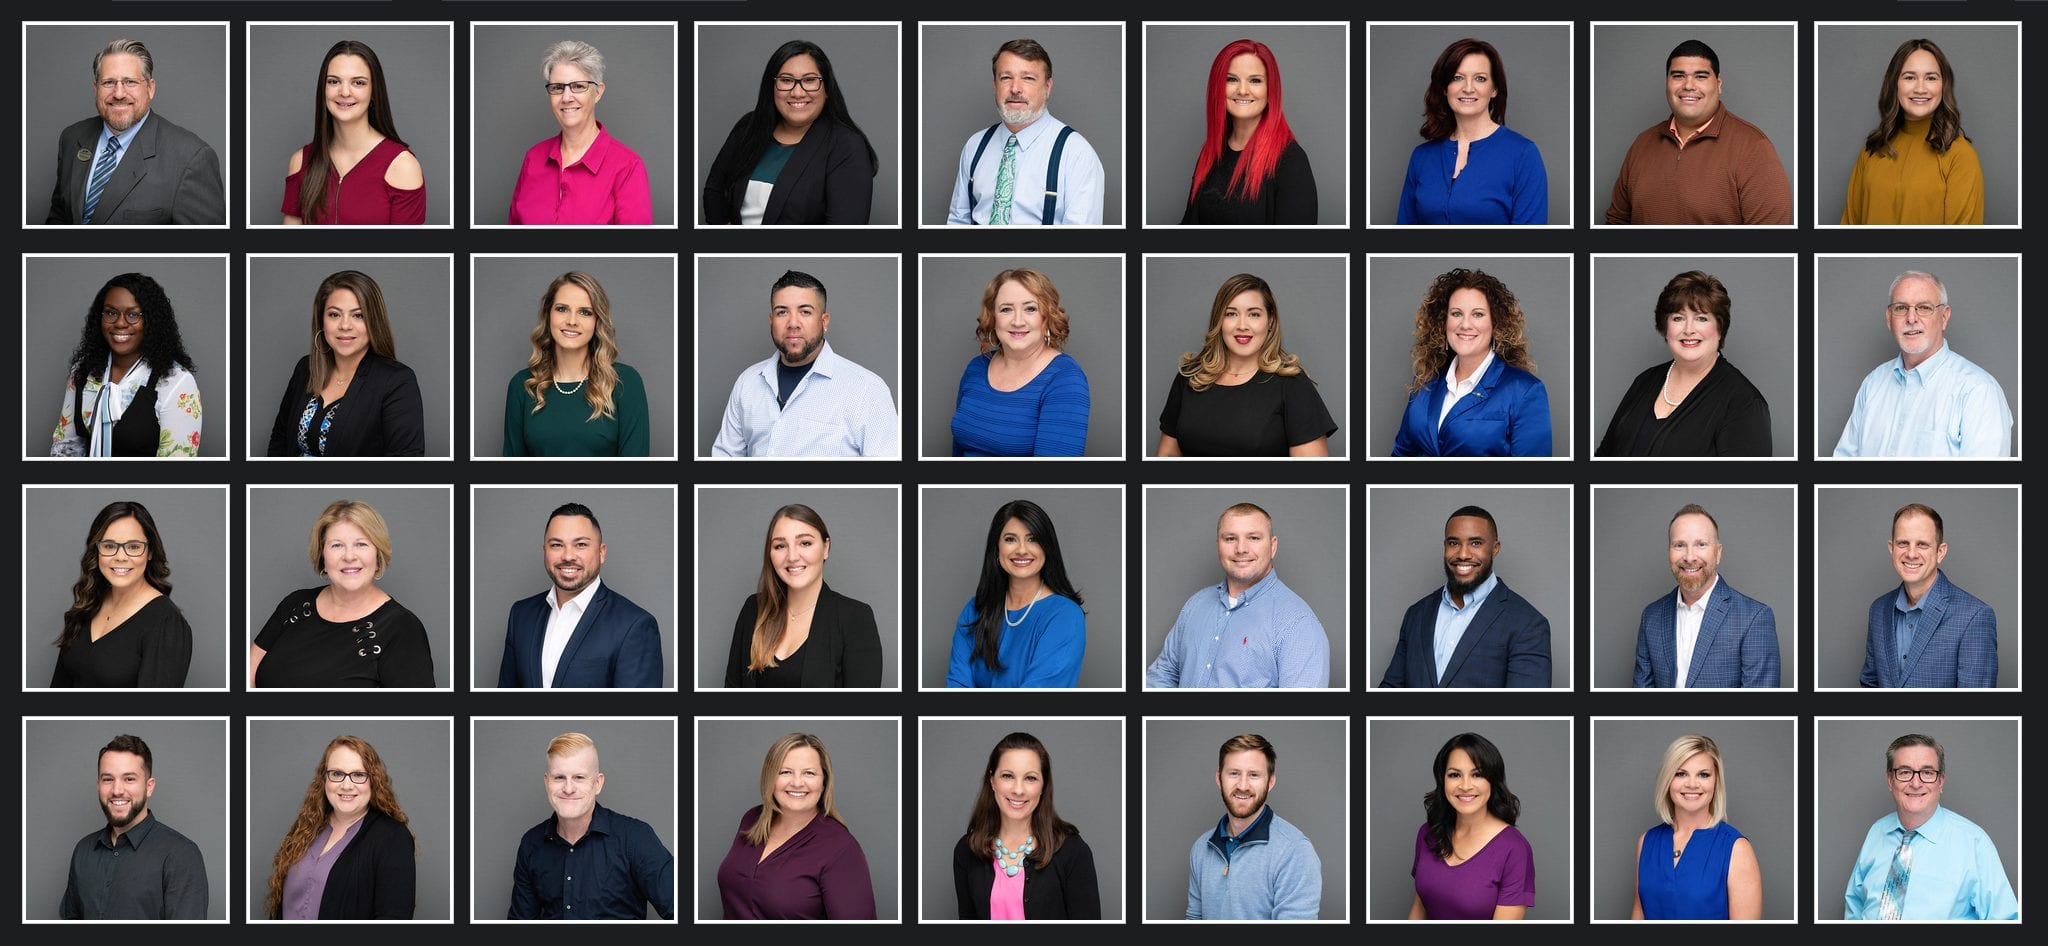 Professional-Portrait-Photography: Team-Corporate-Headshot-Session in Top-Studio, Lakeland, Central Florida